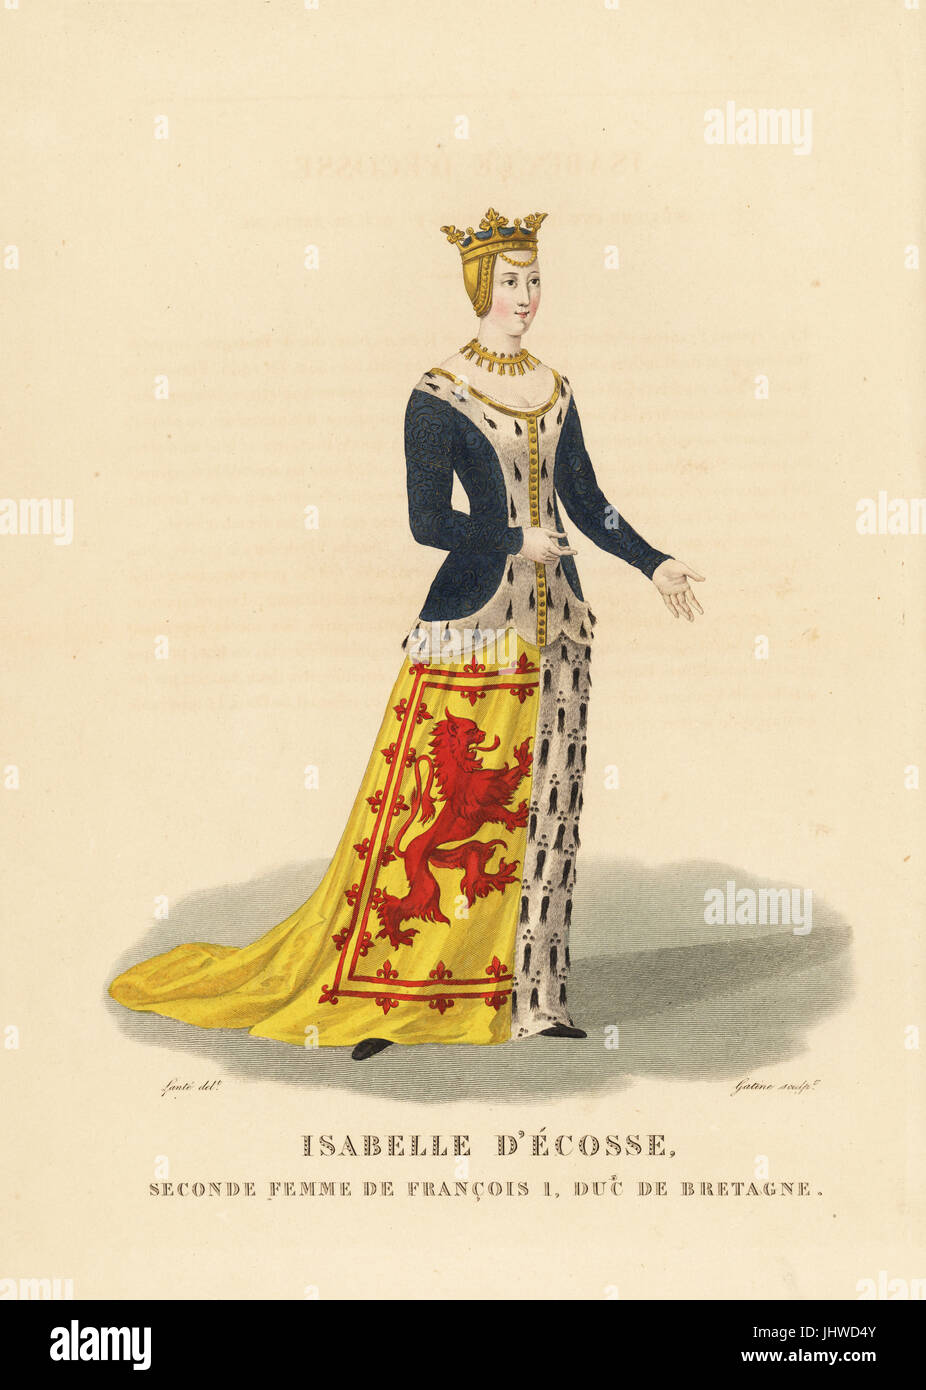 Isabella Stewart, Isabel of Scotland, second wife of Francis I, Duke of Brittany. In armorial robe with coat of arms of Scotland (red lion rampant with double tressure) and Brittany (ermine). She wears a crown, gold necklace, and ermine trimmed surtout. Handcoloured copperplate engraving by Georges Jacques Gatine after an illustration by Louis Marie Lante from Galerie Francaise de Femmes Celebres, Paris, 1827. Stock Photo